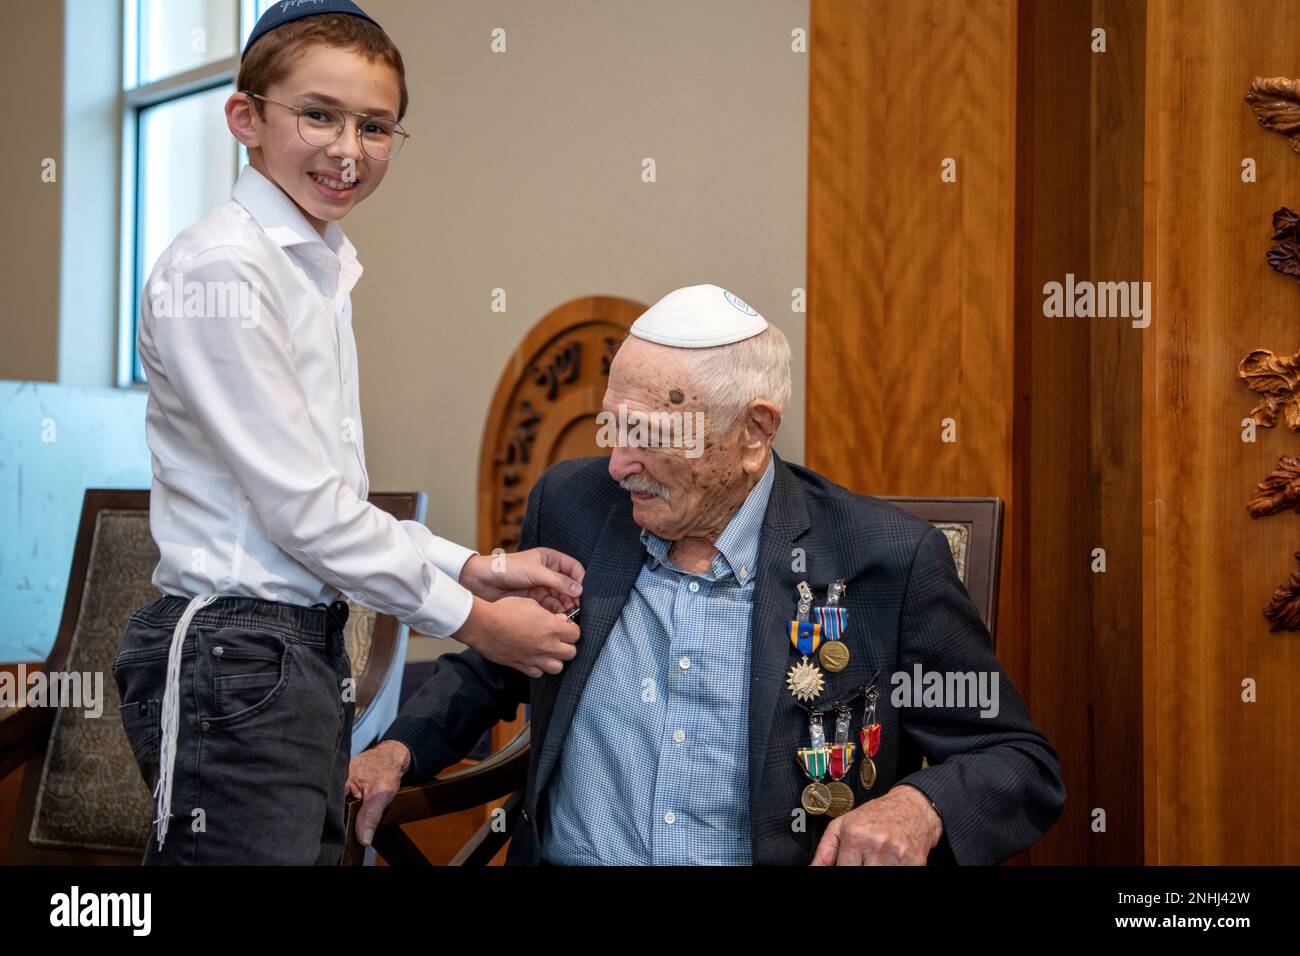 U.S. Army Air Corps 1st Lt. Gerald Teldon (right), retired, receives his Distinguished Unit Citation from his great grandson, Menachem Mendel Teldon, for his honorable service as a pilot on July 29, 2022, at the Chabad Center for Jewish Life and Learning, San Antonio, Texas. Teldon, born in the Bronx, N.Y., in 1924, joined the military in 1944. He completed 62 missions during WWII and the Korean War. Lt. Col. Andrew Stein, 502nd Operations Support Squadron commander, was the presiding officer. The awards presented to Teldon are as follows: the Air Medal; American Campaign Medal; European – Afr Stock Photo